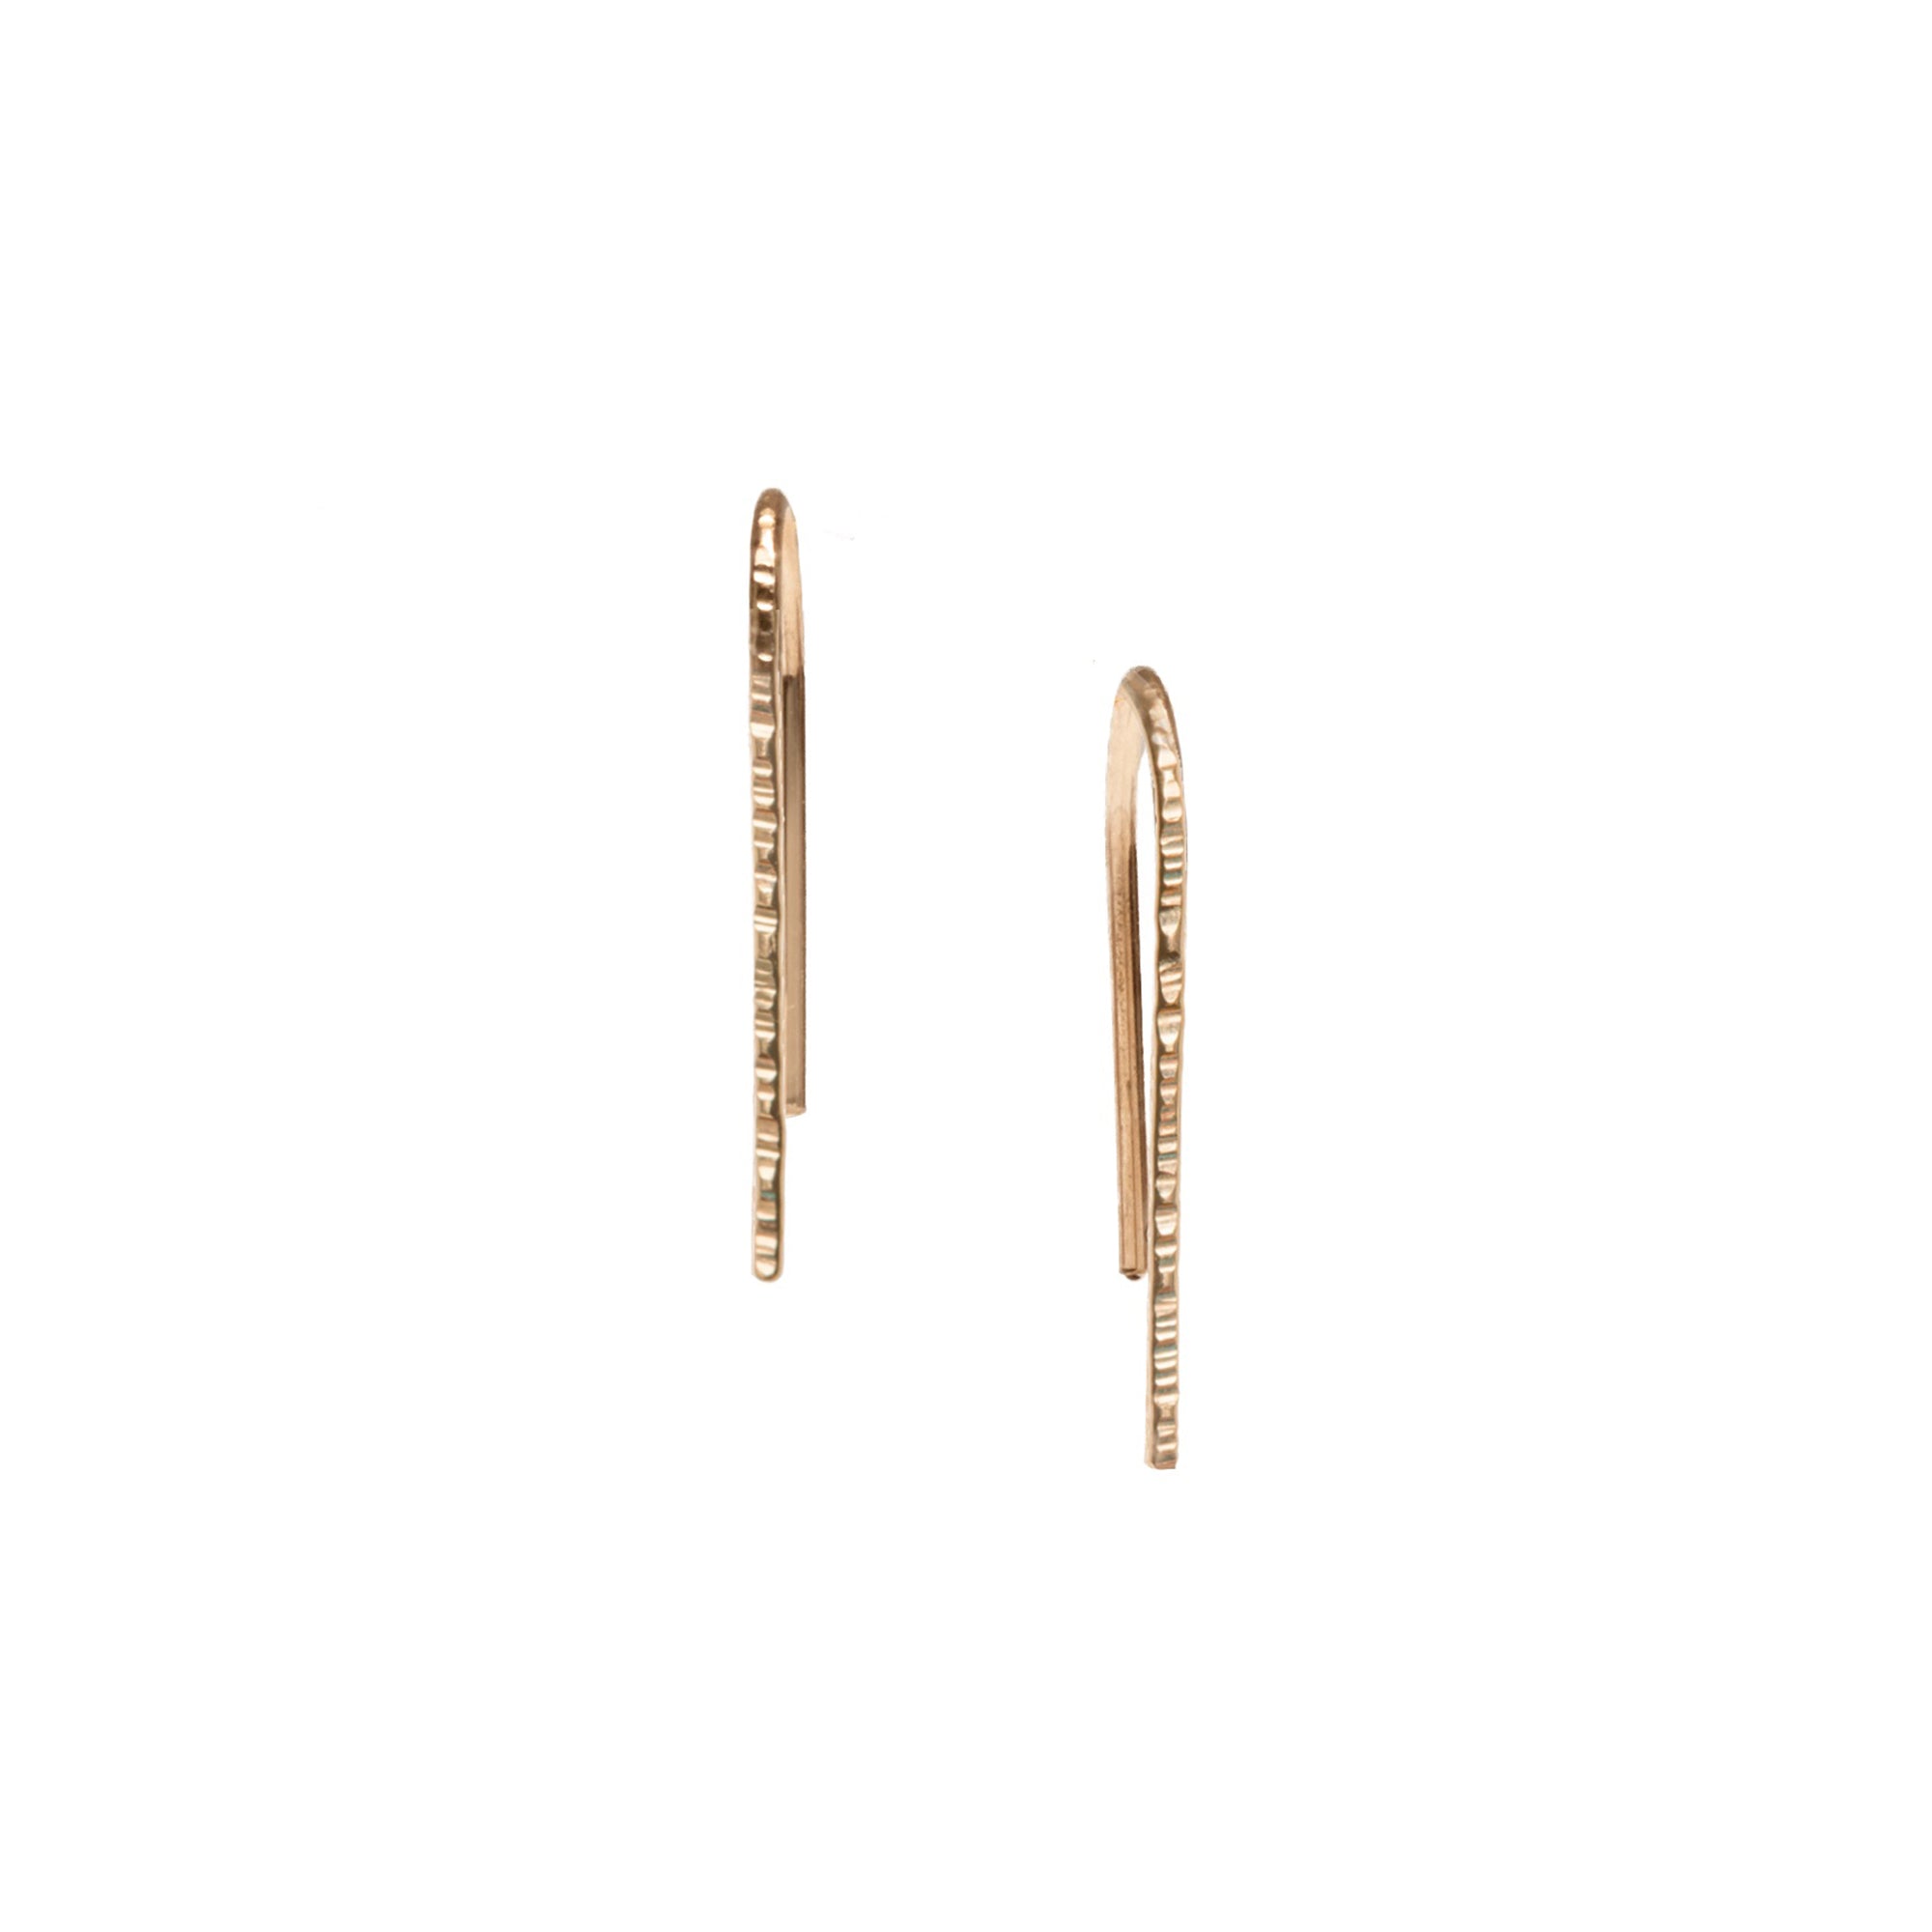 Delicate, with a distinctive light-catching texture, our Trace Hook Earrings are minimal threader earrings